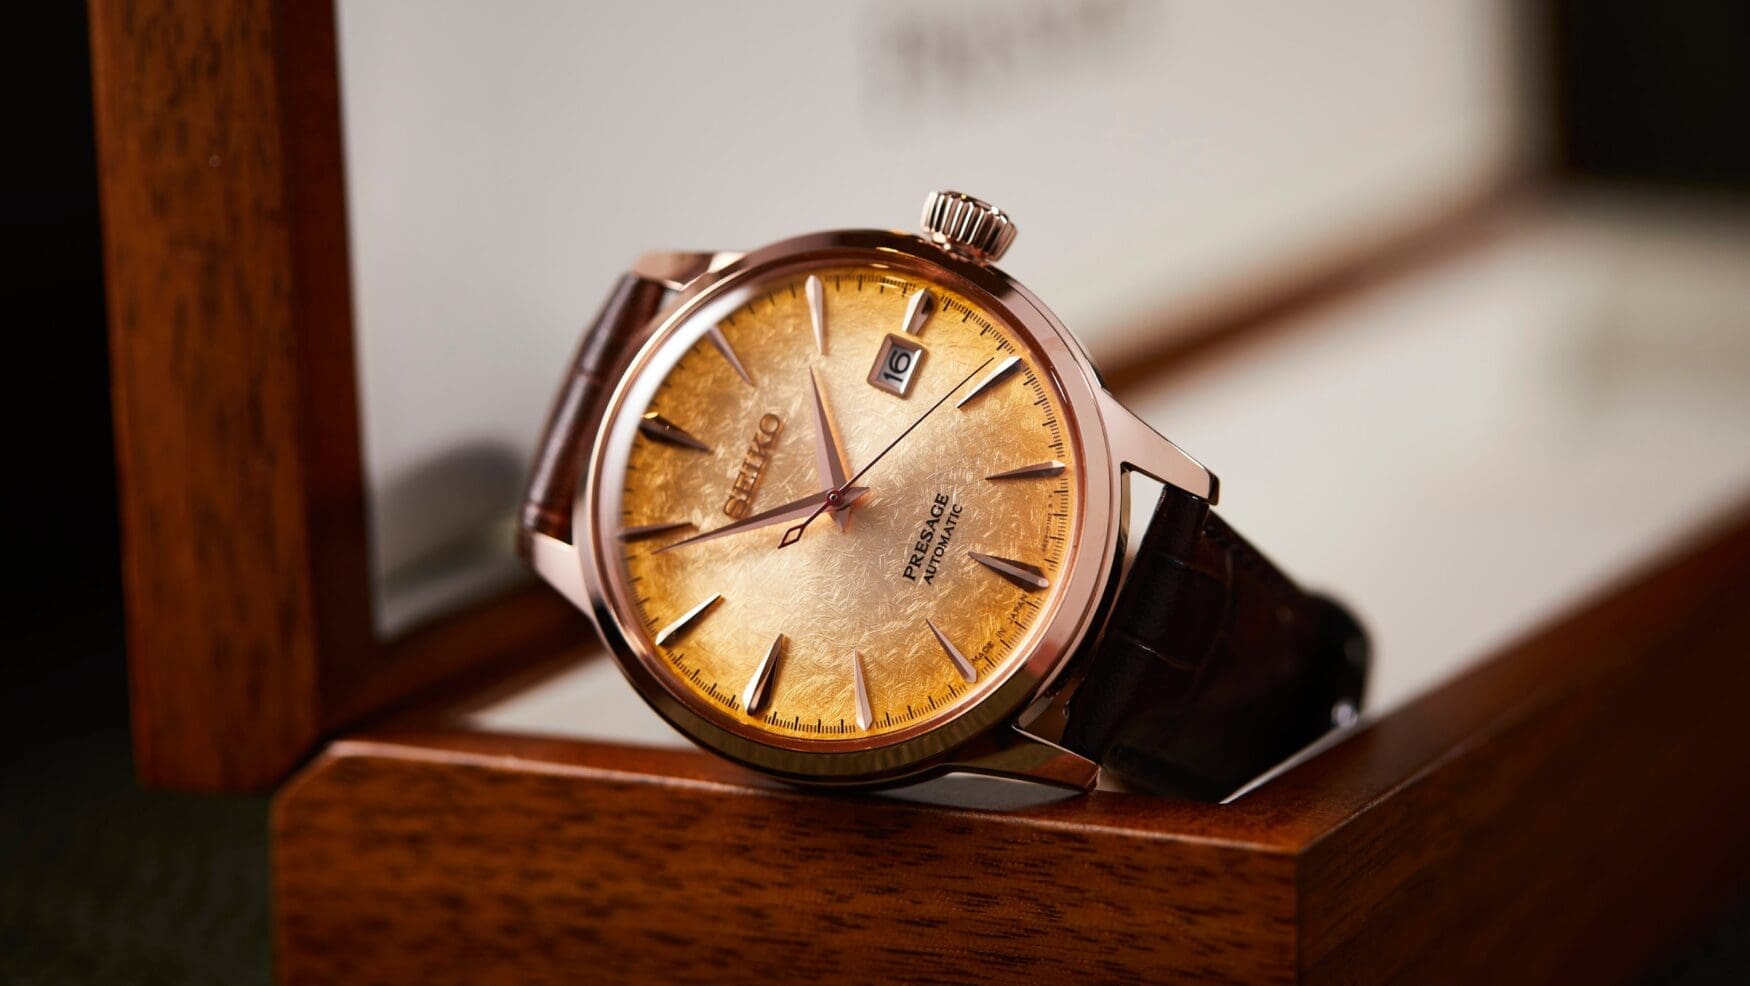 The Seiko Cocktail Time Irori Moments SRPK50 combines Australian and Japanese inspiration